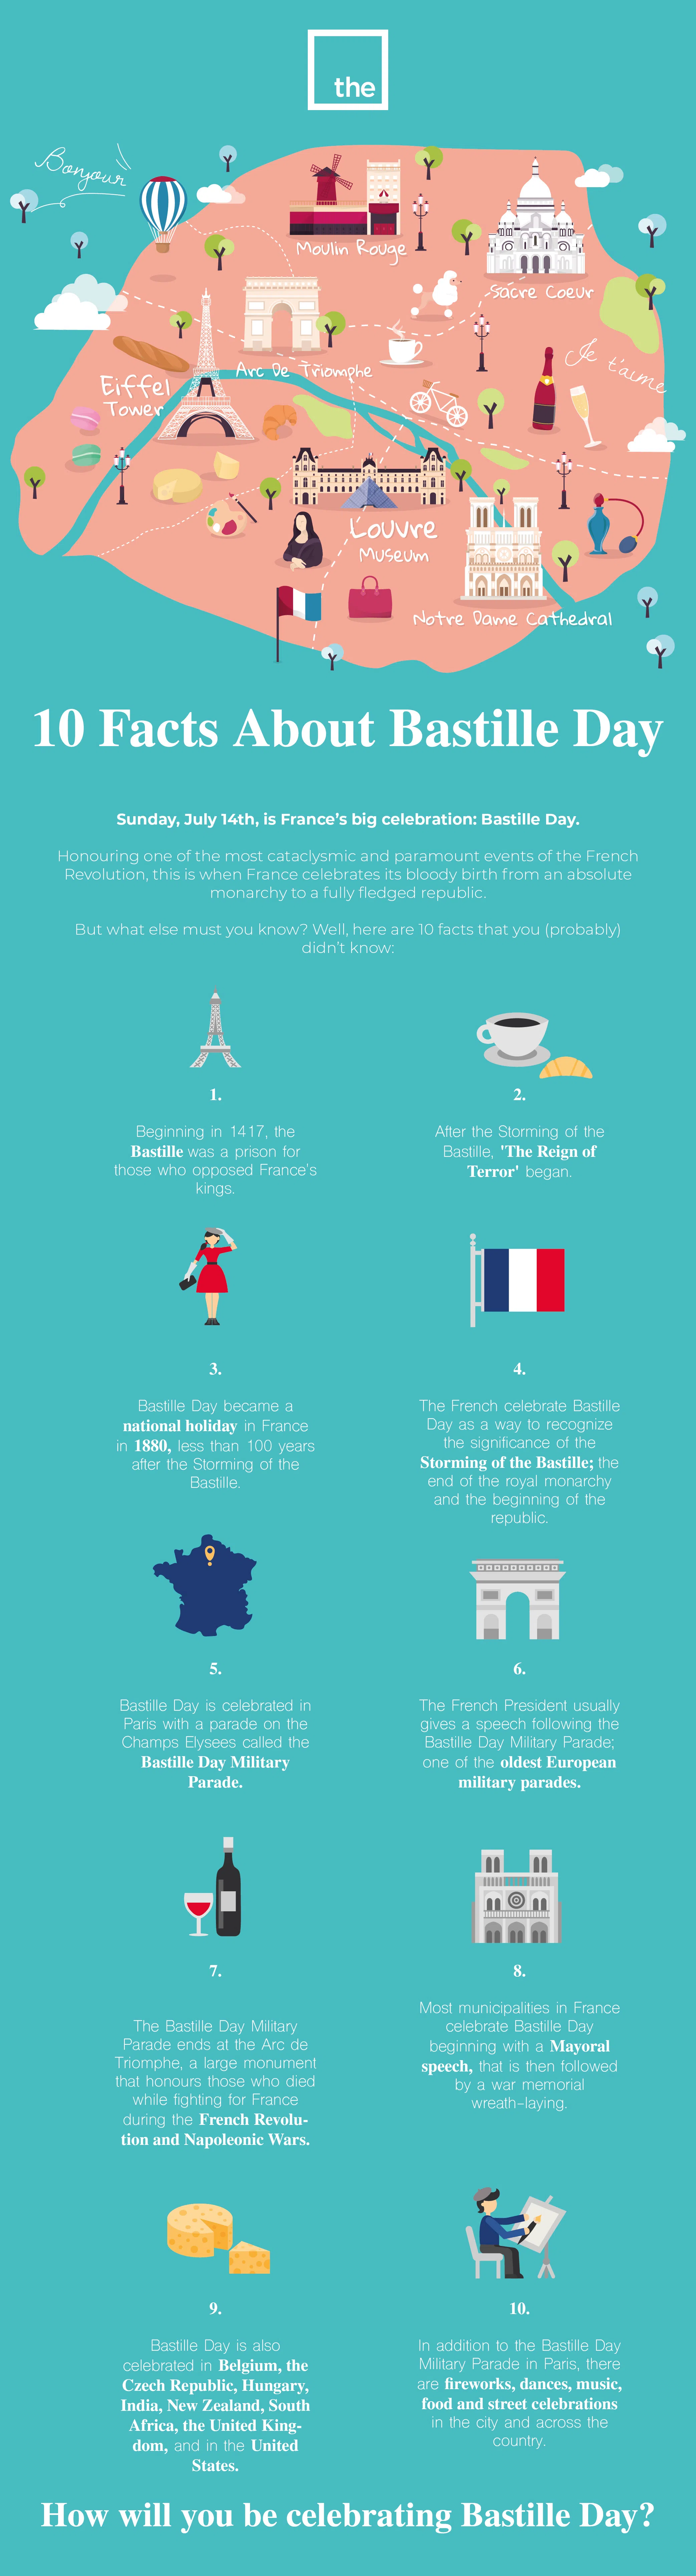 Facts about Bastille Day